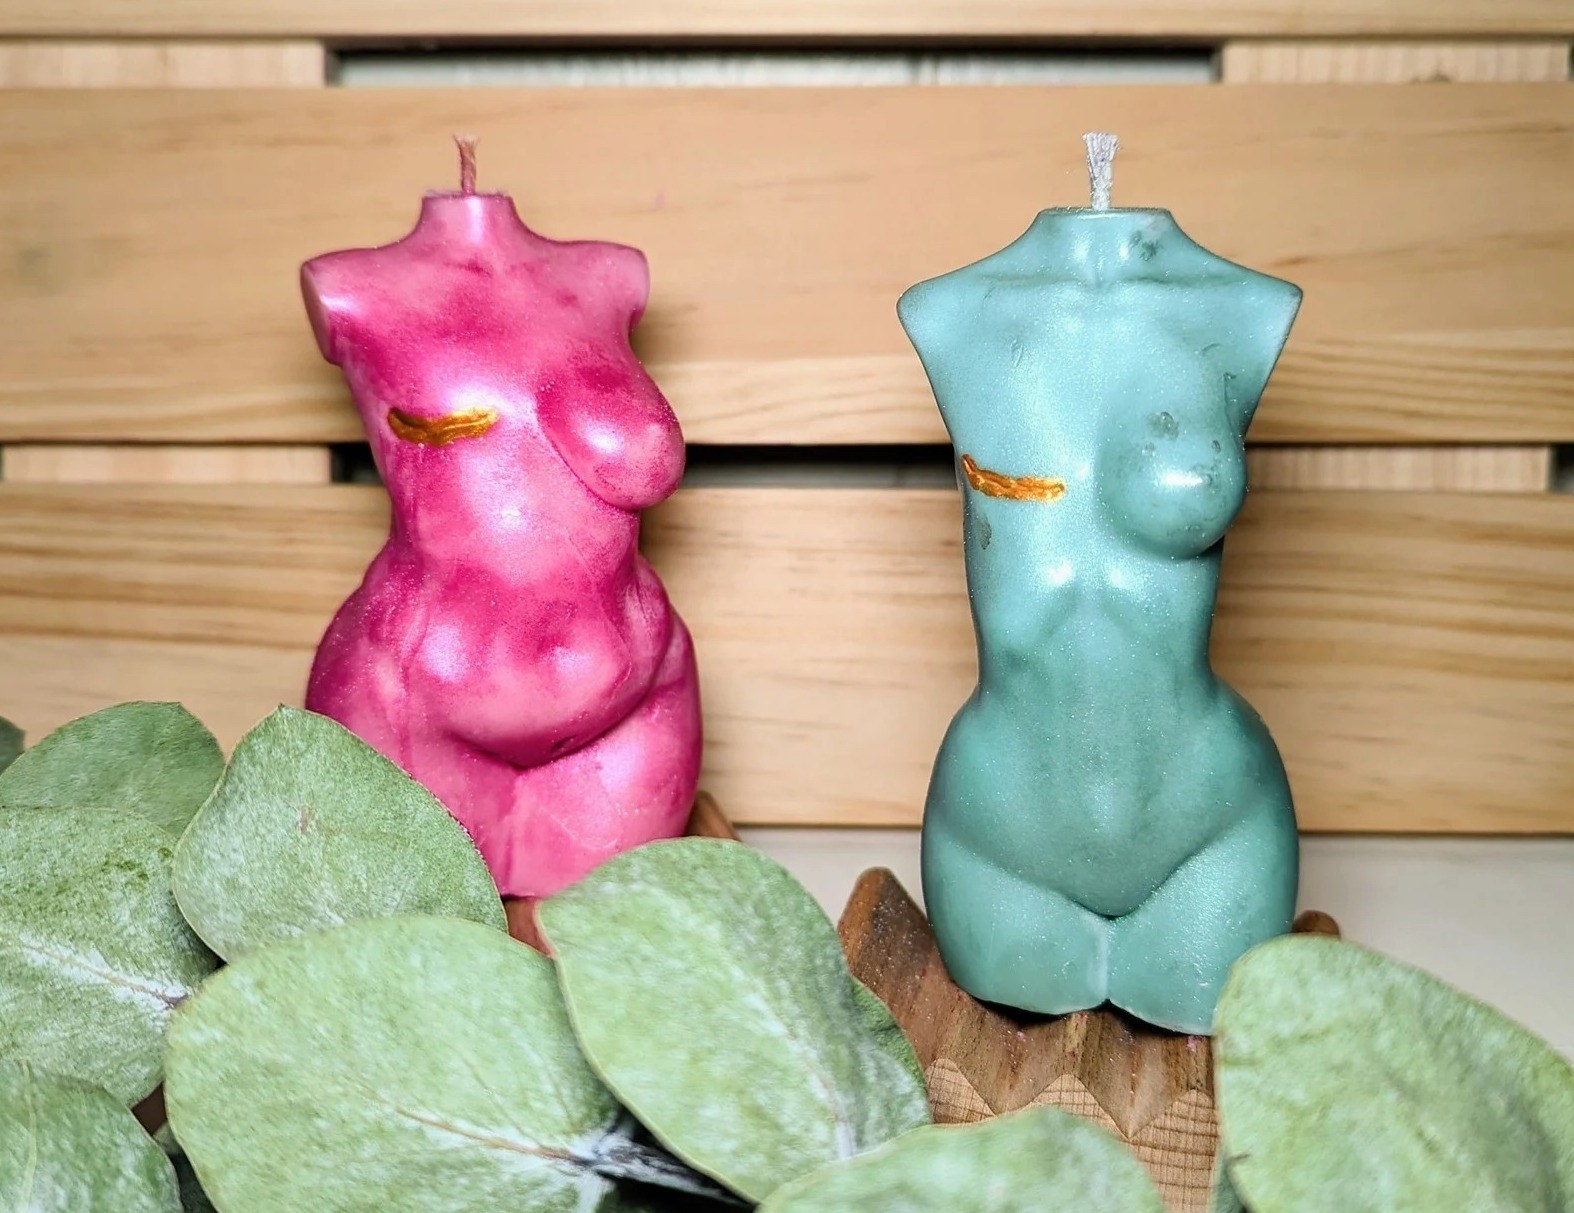 Two candles with human forms are shown with mastectomy scars across the chest